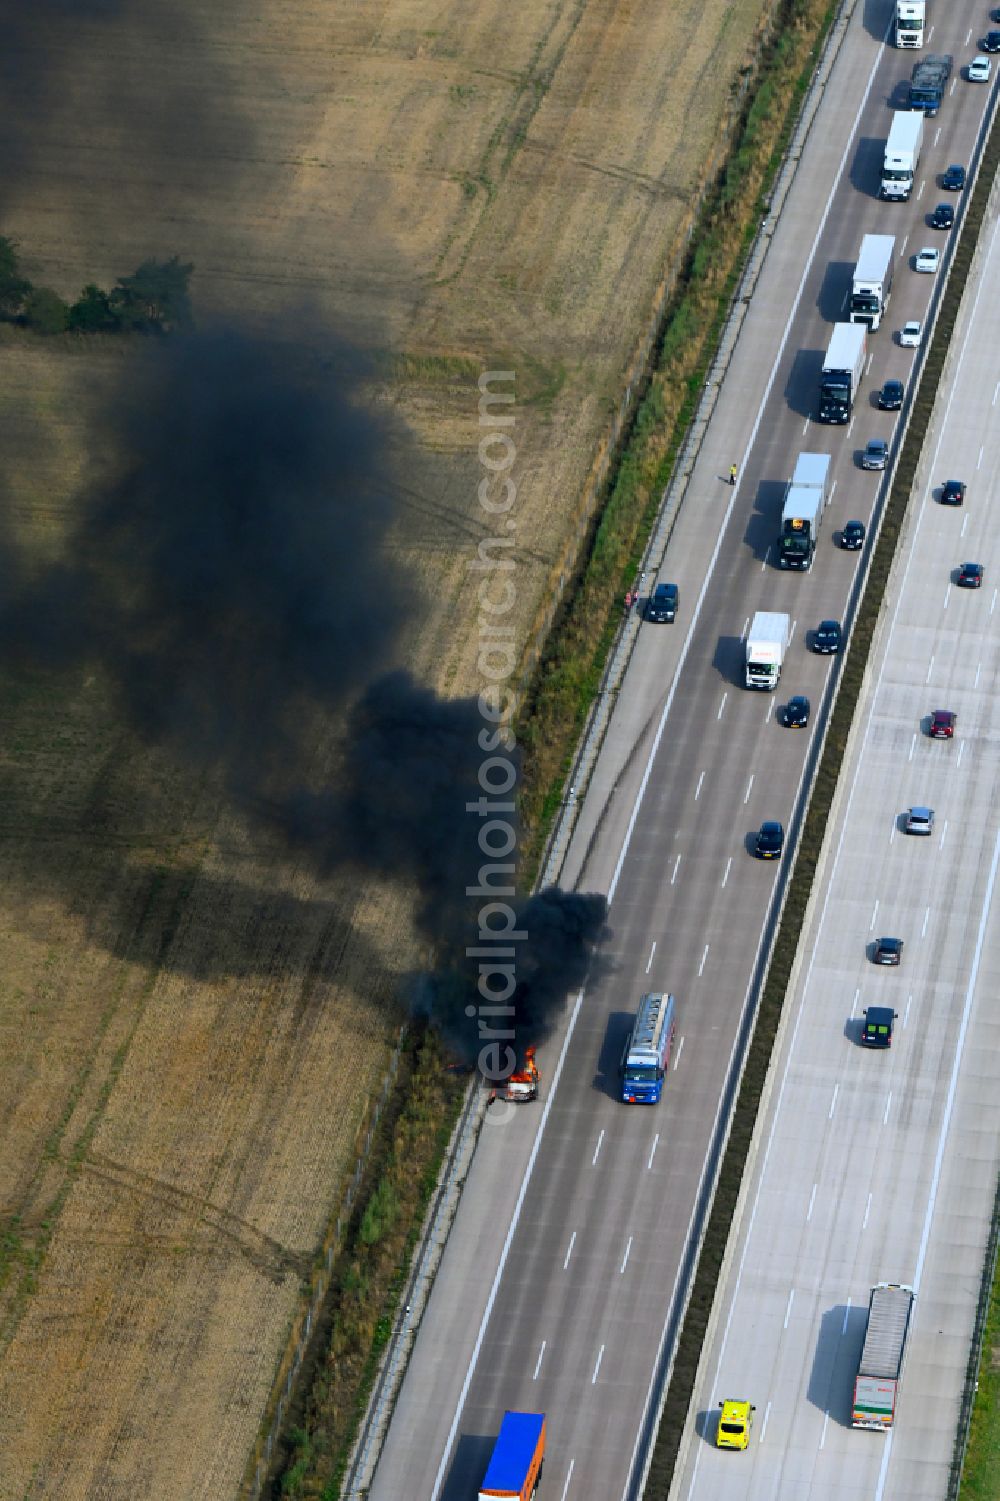 Aerial image Buchholz (Aller) - Smoke and flames from a motor vehicle fire in a passenger car on the A7 motorway in Buchholz (Aller) in the state Lower Saxony, Germany